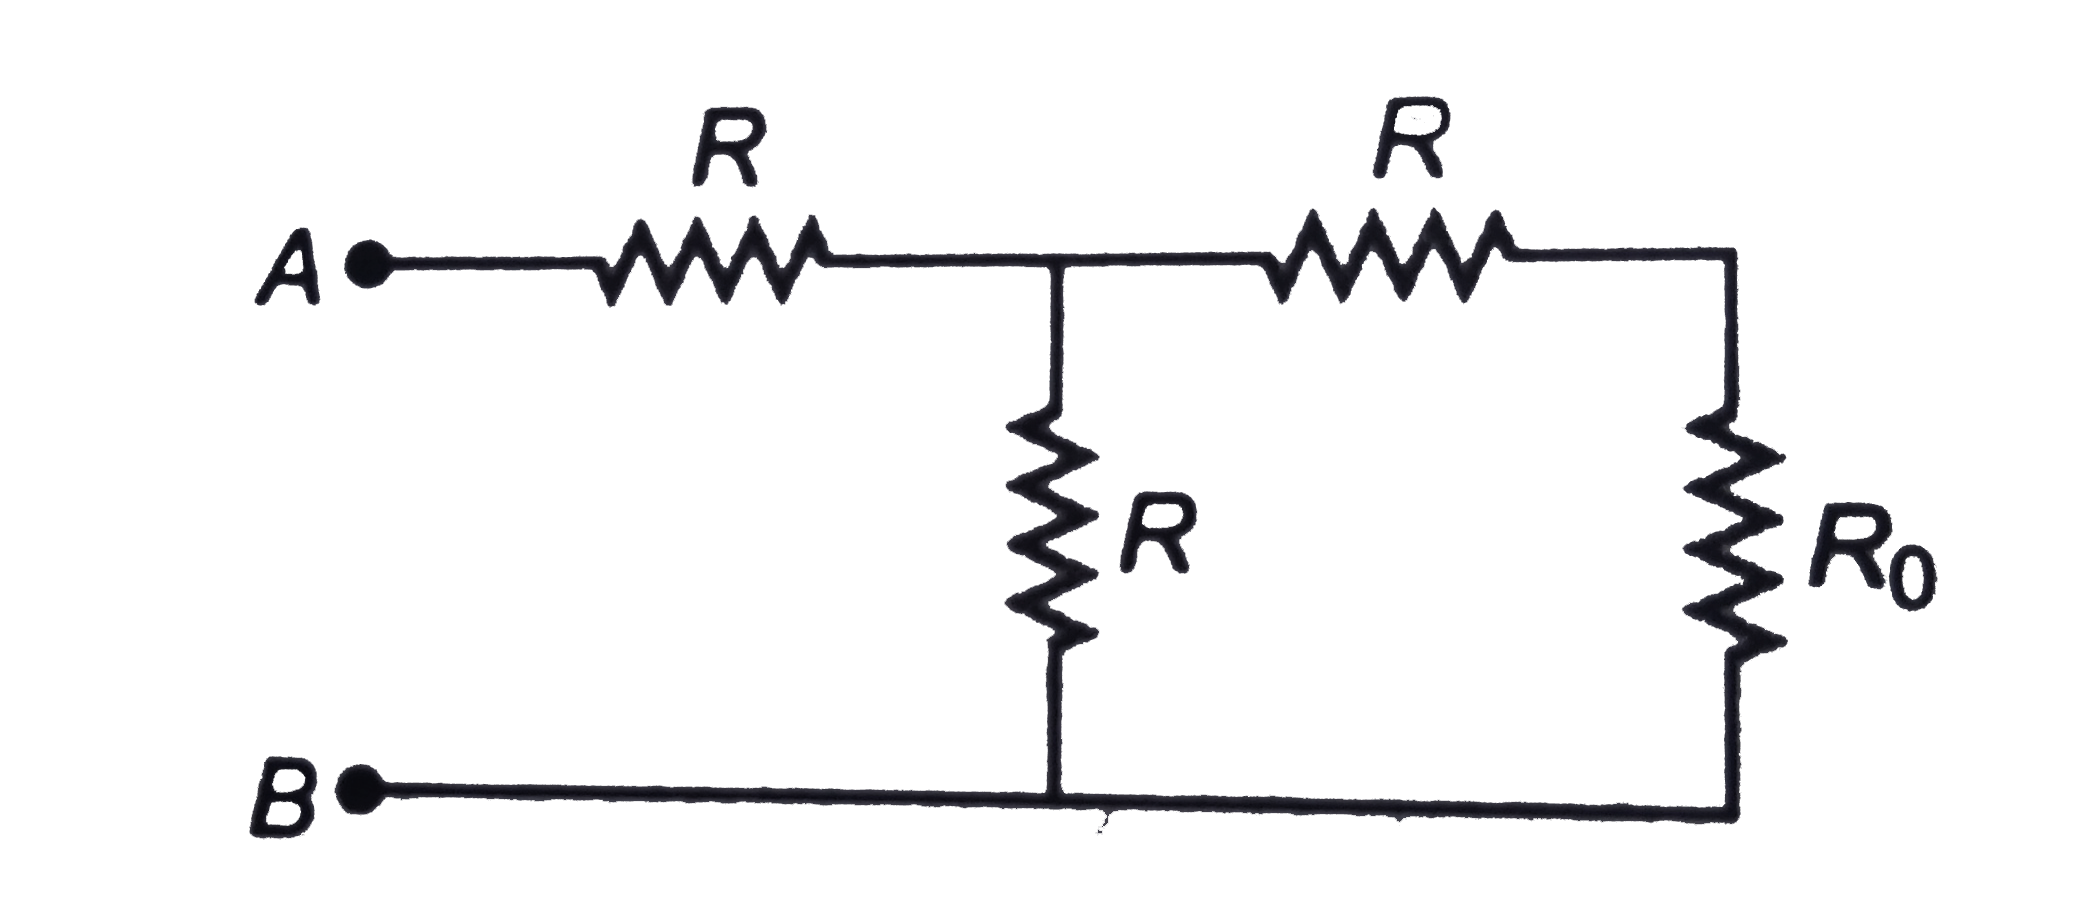 In the circuit shown in figure the total resistance between points A and B is R0. The value of resistance R is